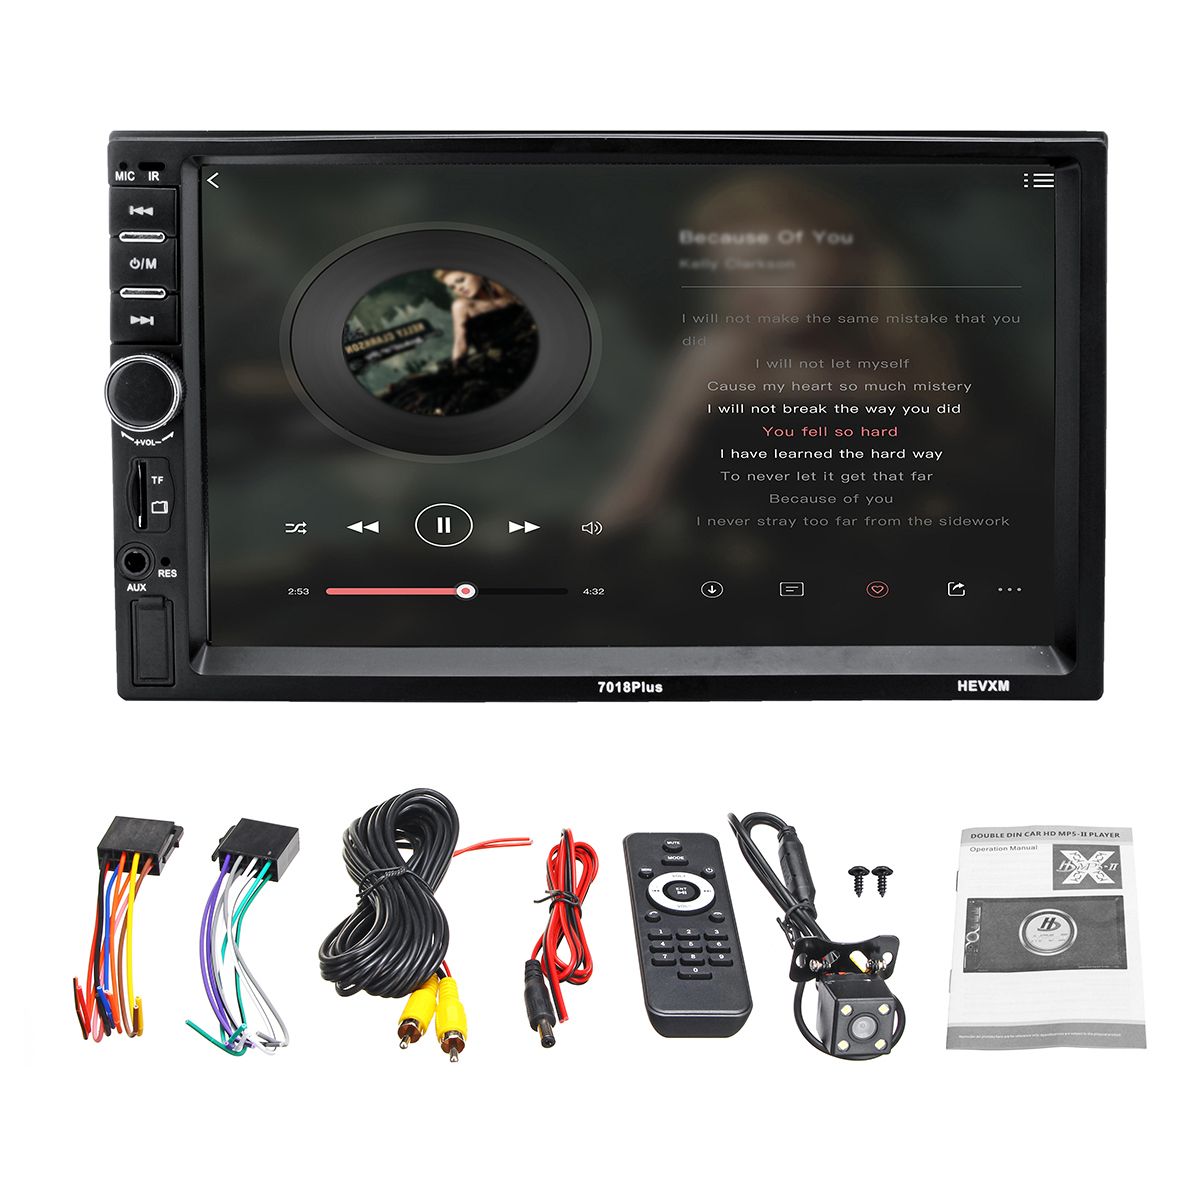 7018Plus-7Inch-2-DIN-Car-MP5-Player-Multimedia-Stereo-Radio-Touch-Screen-FM-bluetooth-Remote-Control-1694093